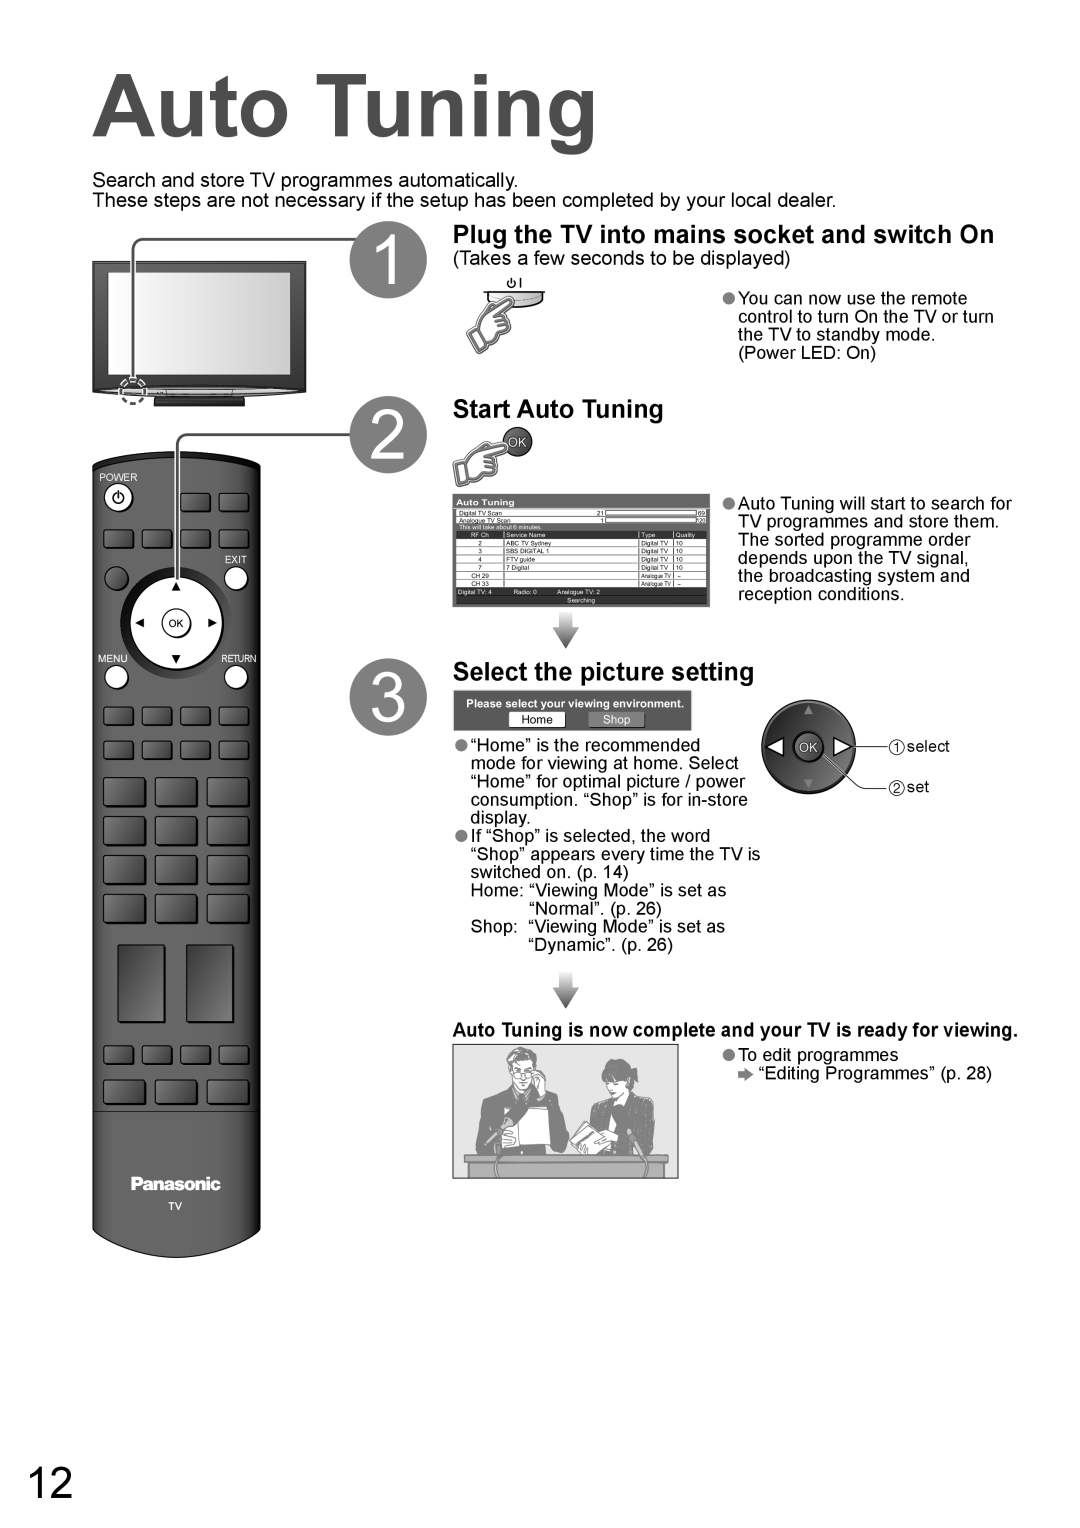 Panasonic TH-50PZ850AZ, TH-42PZ850AZ Auto Tuning, Select the picture setting, Plug the TV into mains socket and switch On 